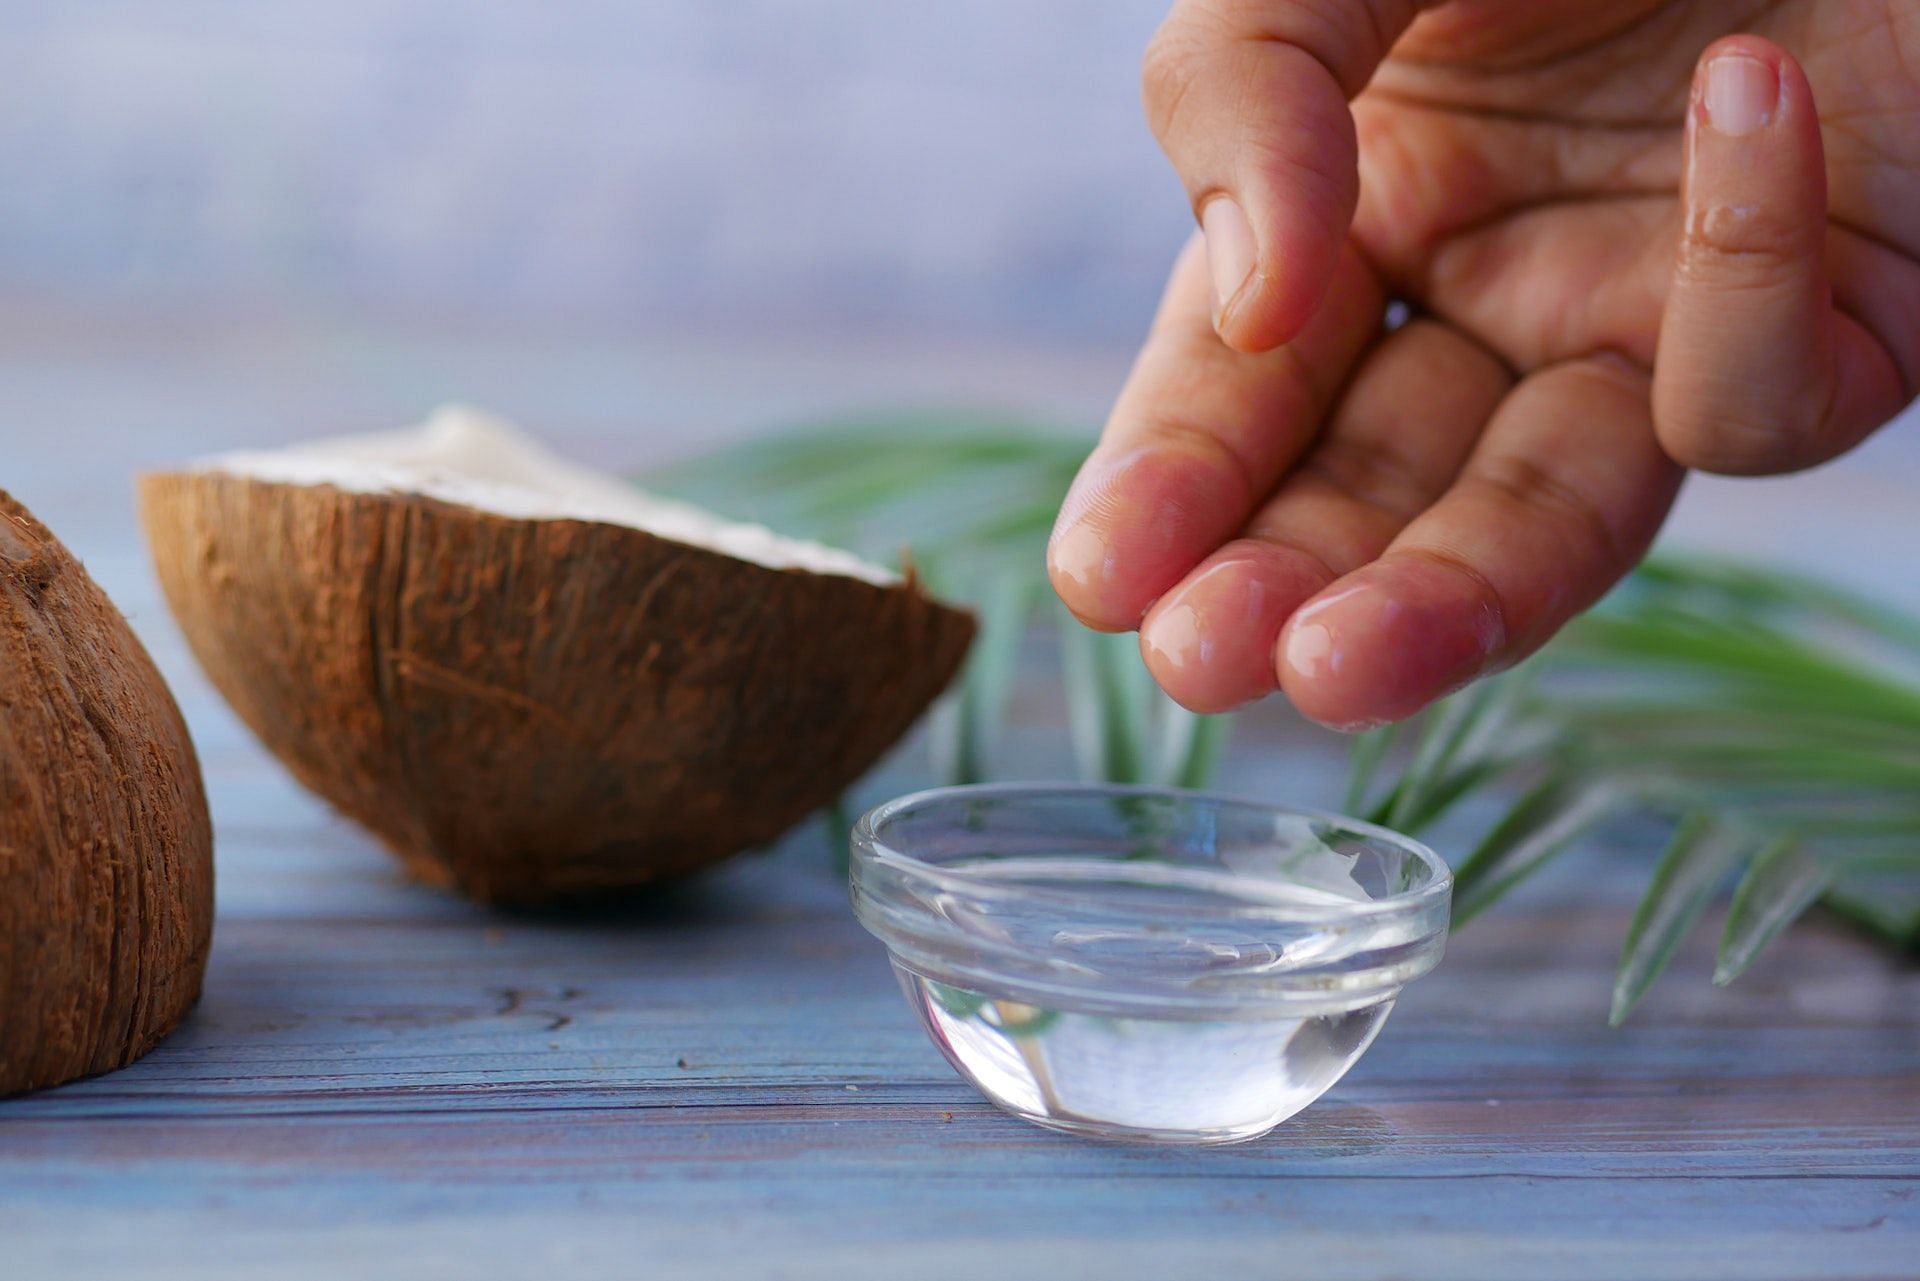 Coconut oil is a great remedy to prevent dandruff and dryness in the scalp. (Photo via Pexels/Towfiqu barbhuiya)